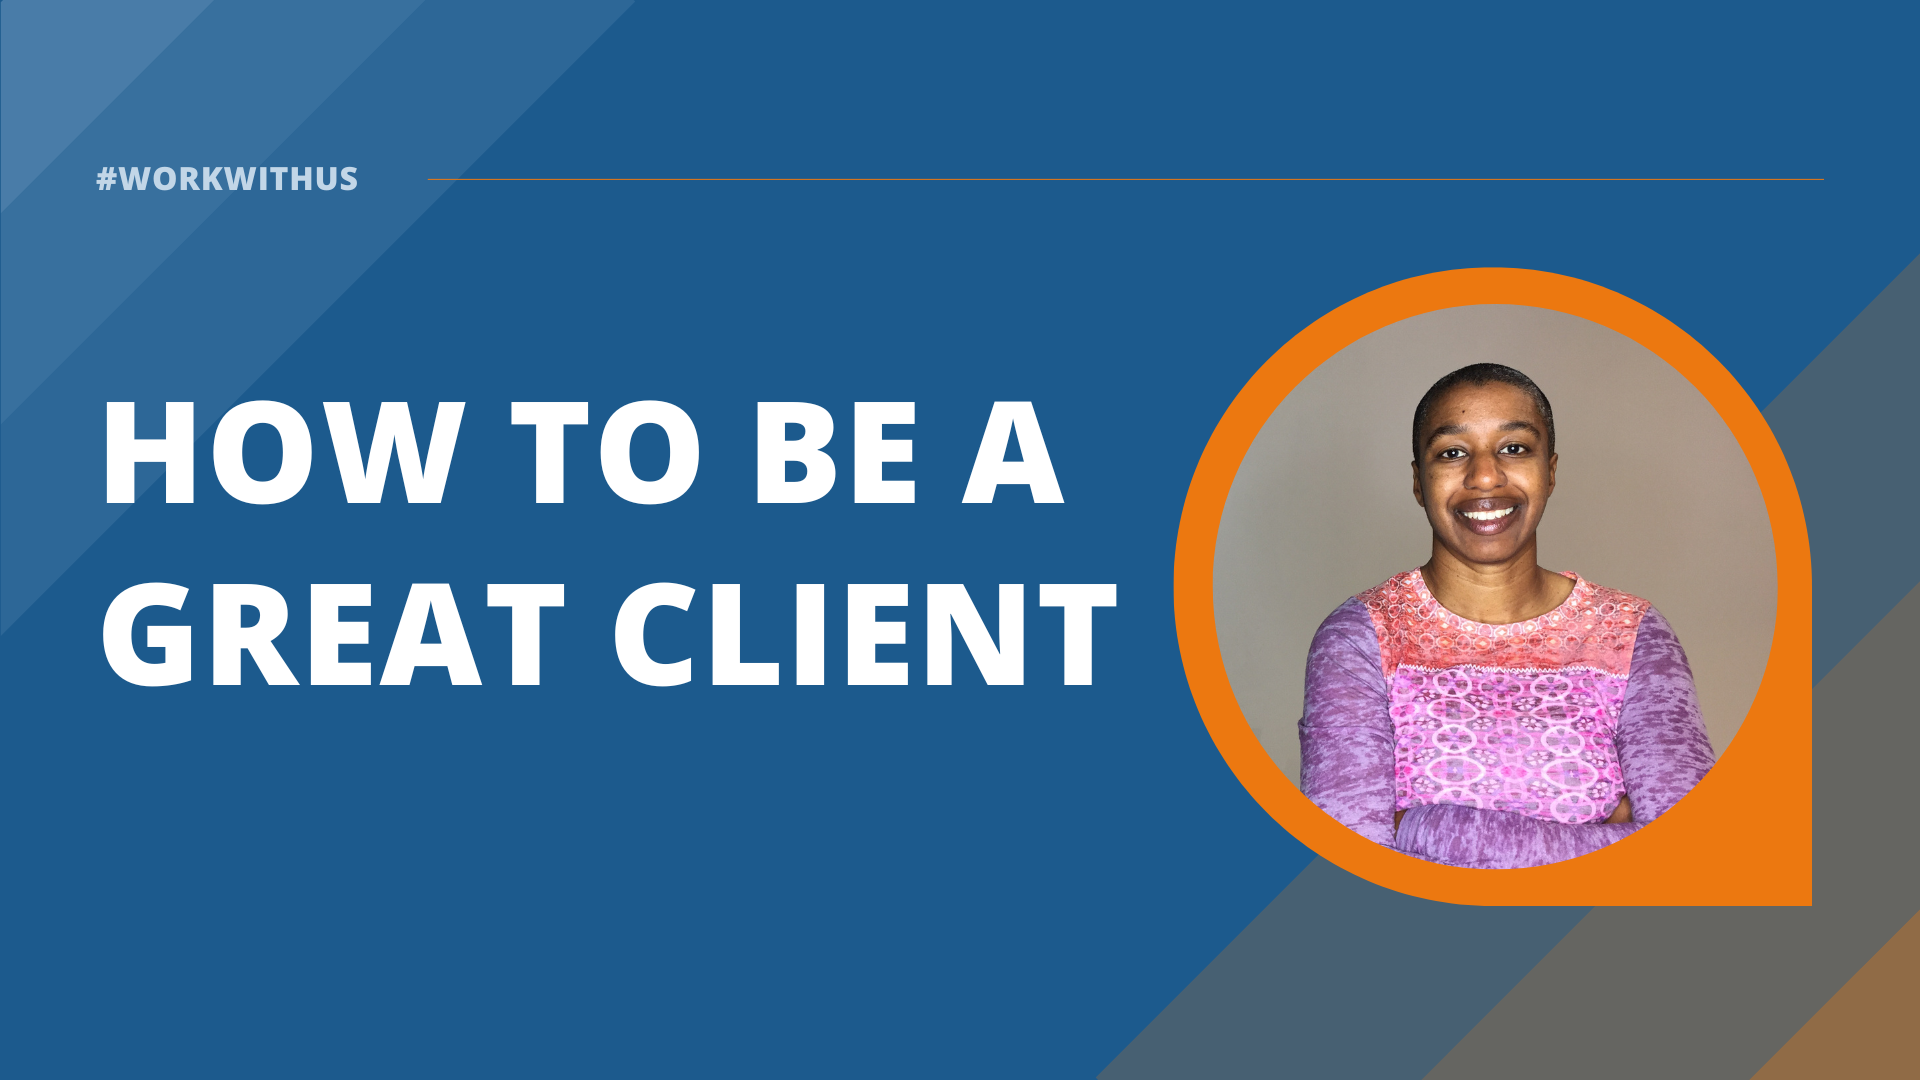 How to be a great client